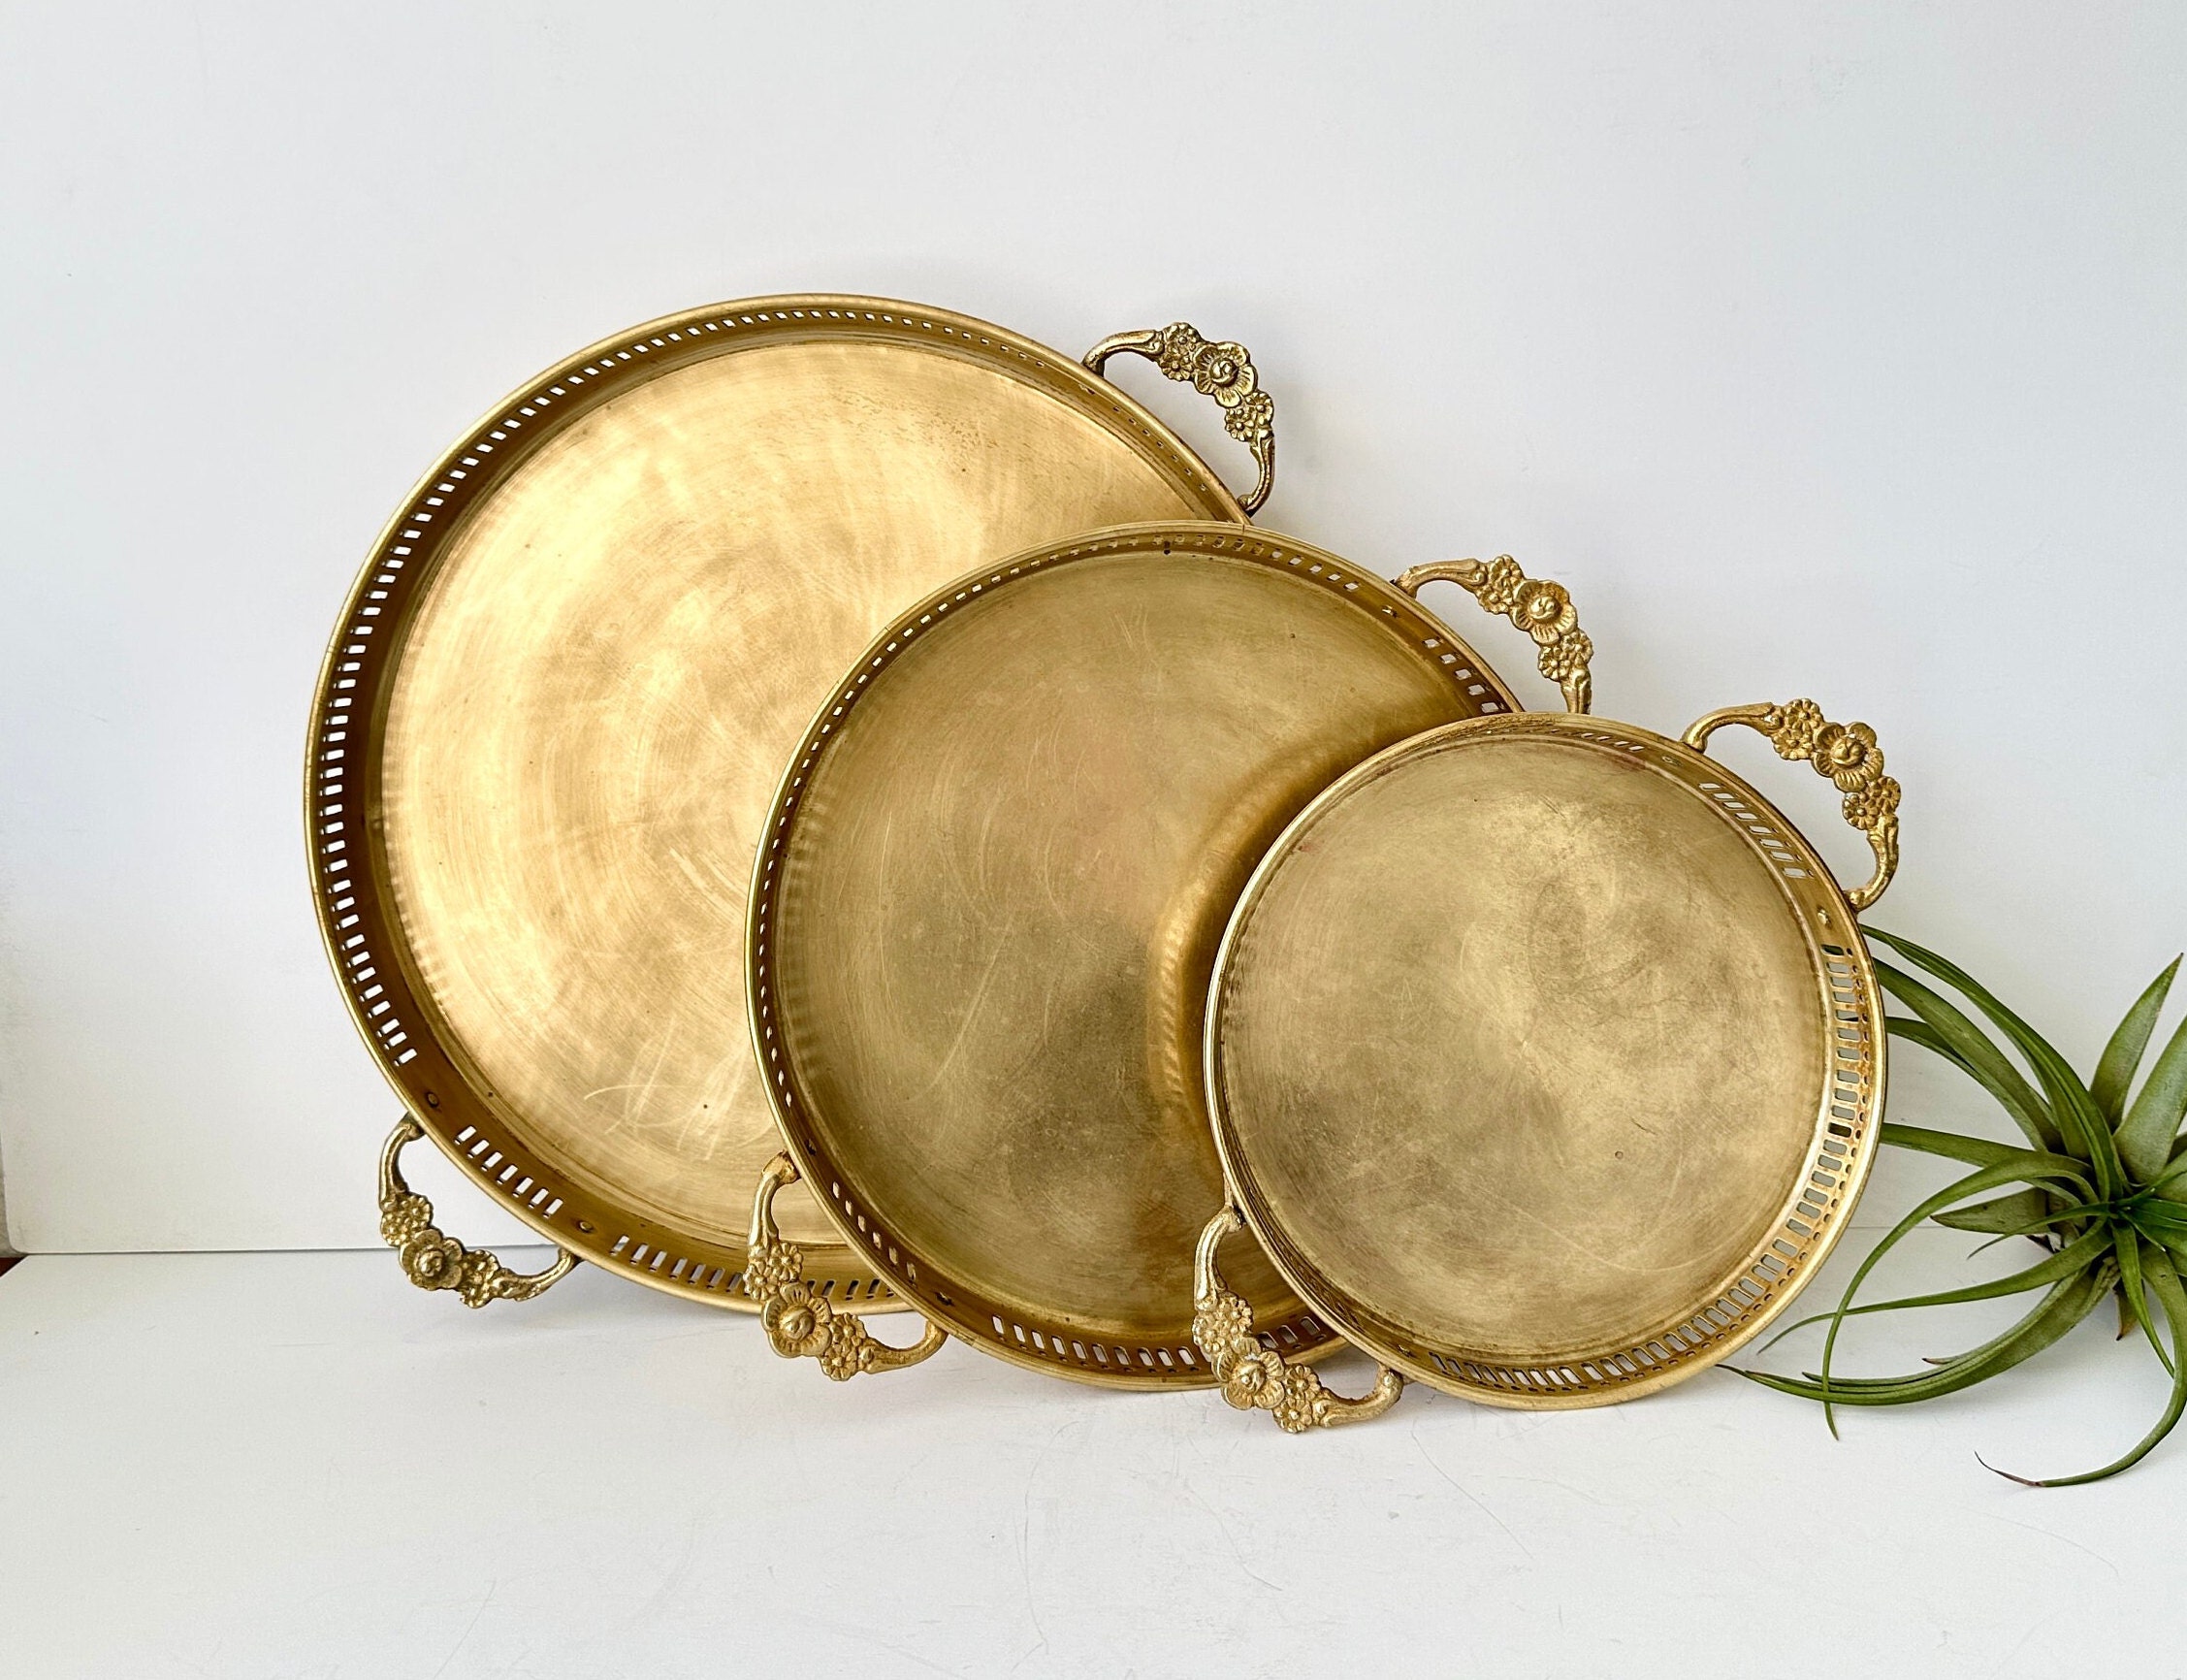 Vintage Regency Furniture Boutique - Brass Tray with Handles $65